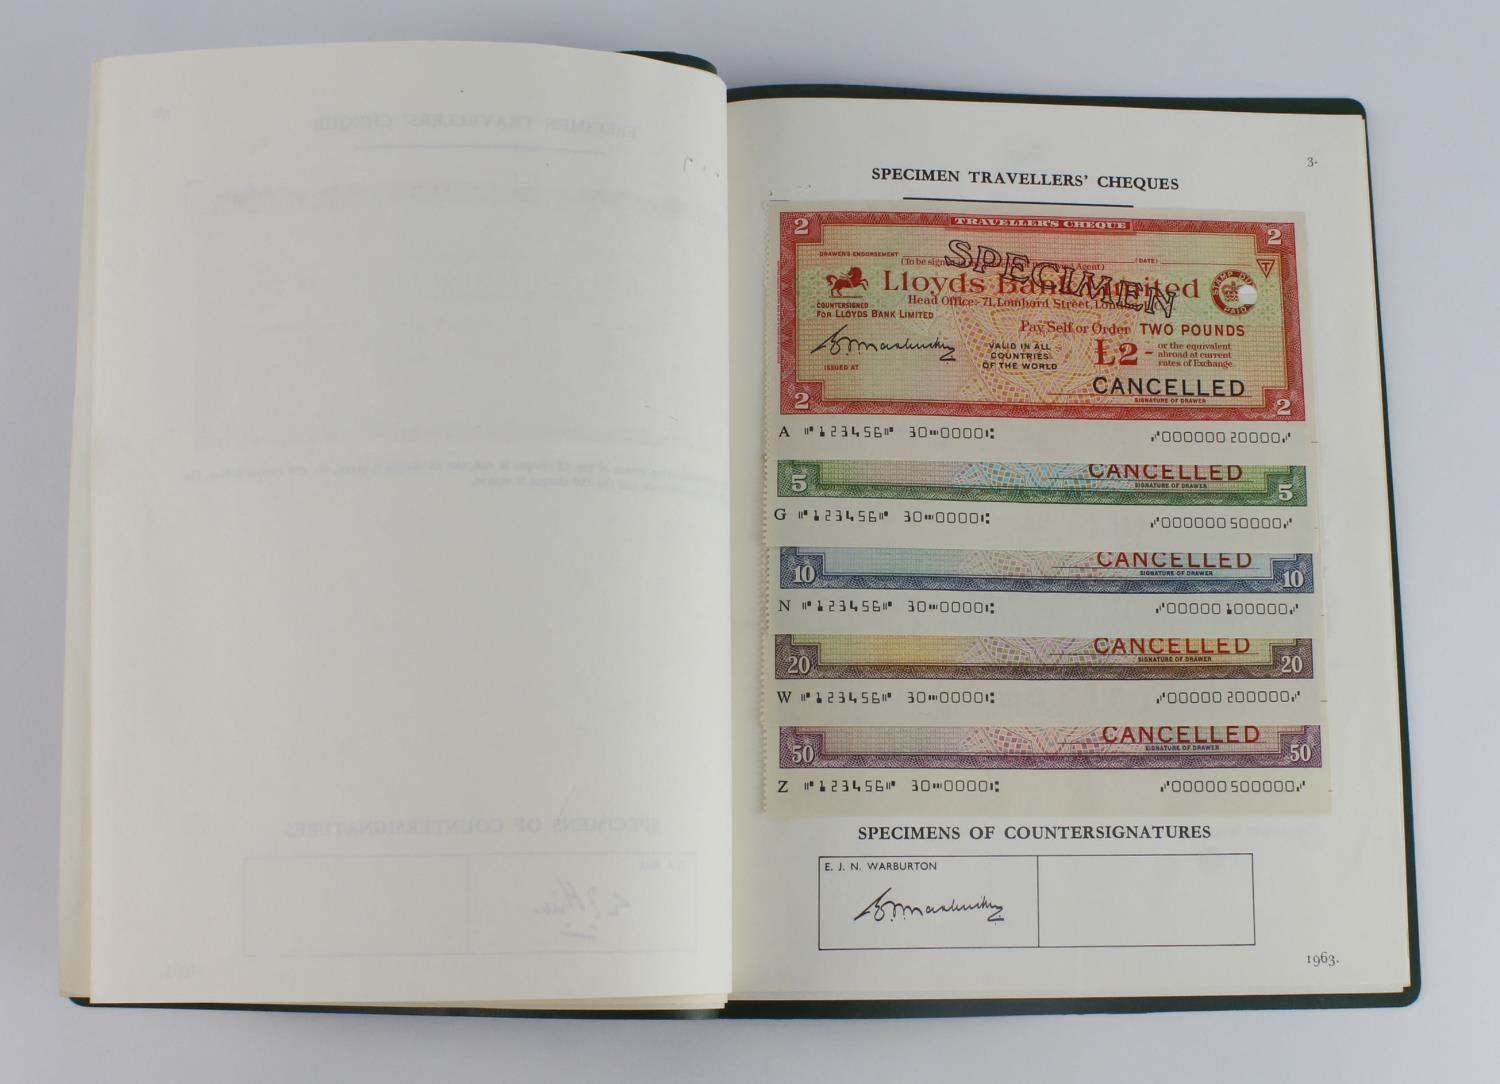 Lloyds Bank Limited SPECIMEN Letters of Credit, Letters of Indication and Travellers Cheques 1950' - Image 11 of 20